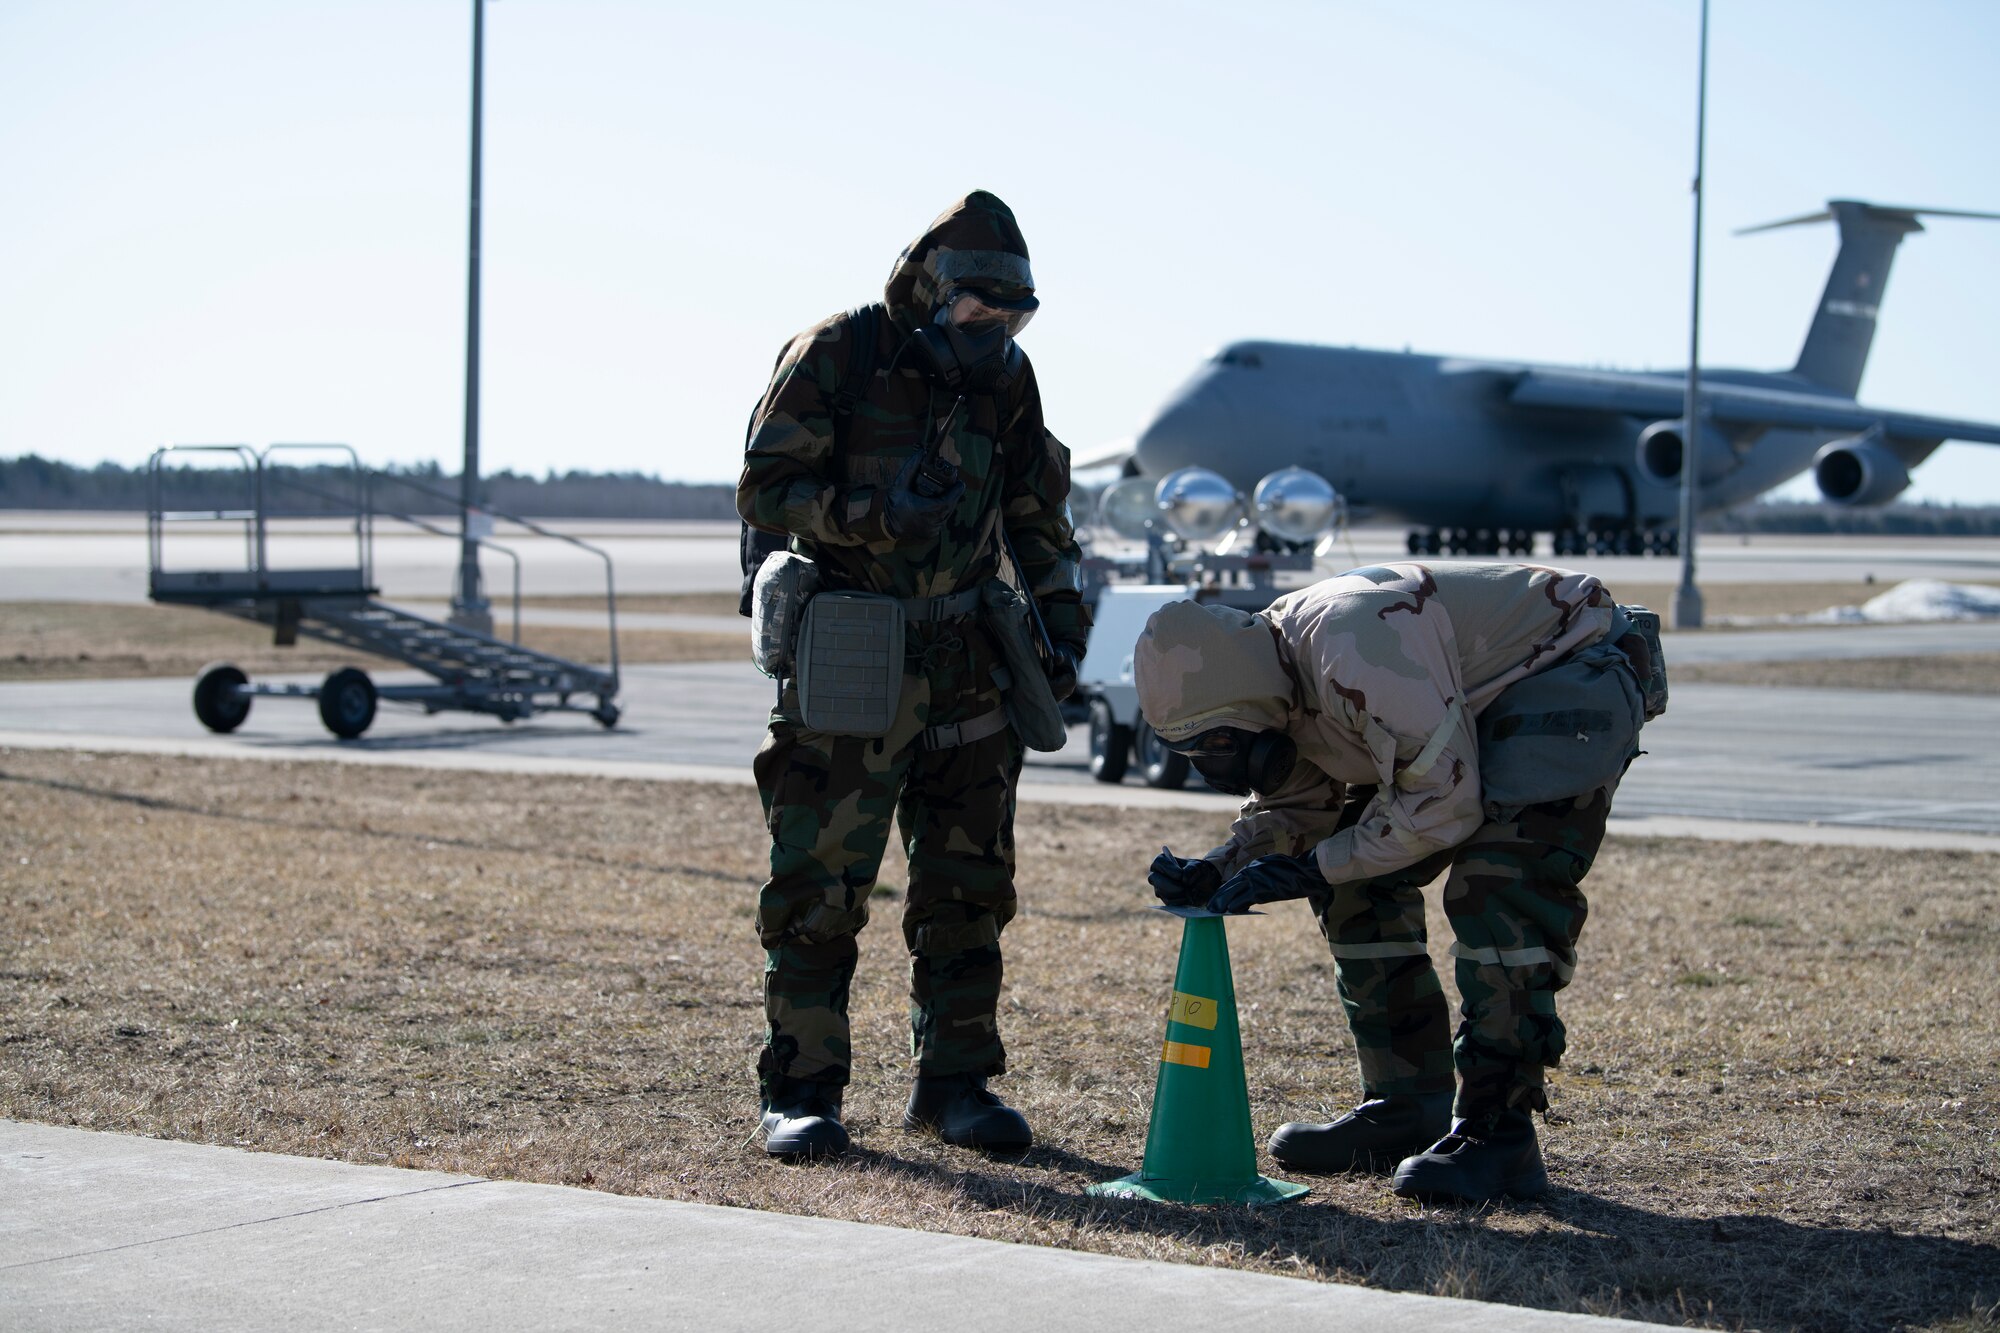 U.S. Air Force Staff Sgt. Jordan Harris, left, 60th Maintenance Squadron aero repair team leader, and Airman 1st Class Eduardo Martinez, 60th MXS aero repair team member, conduct a post-attack reconnaissance after a simulated chemical attack at the Alpena Combat Readiness Training Center, Alpena, Michigan, April 12, 2022. The Airmen are wearing MOPP gear while checking M8 paper on a cone.